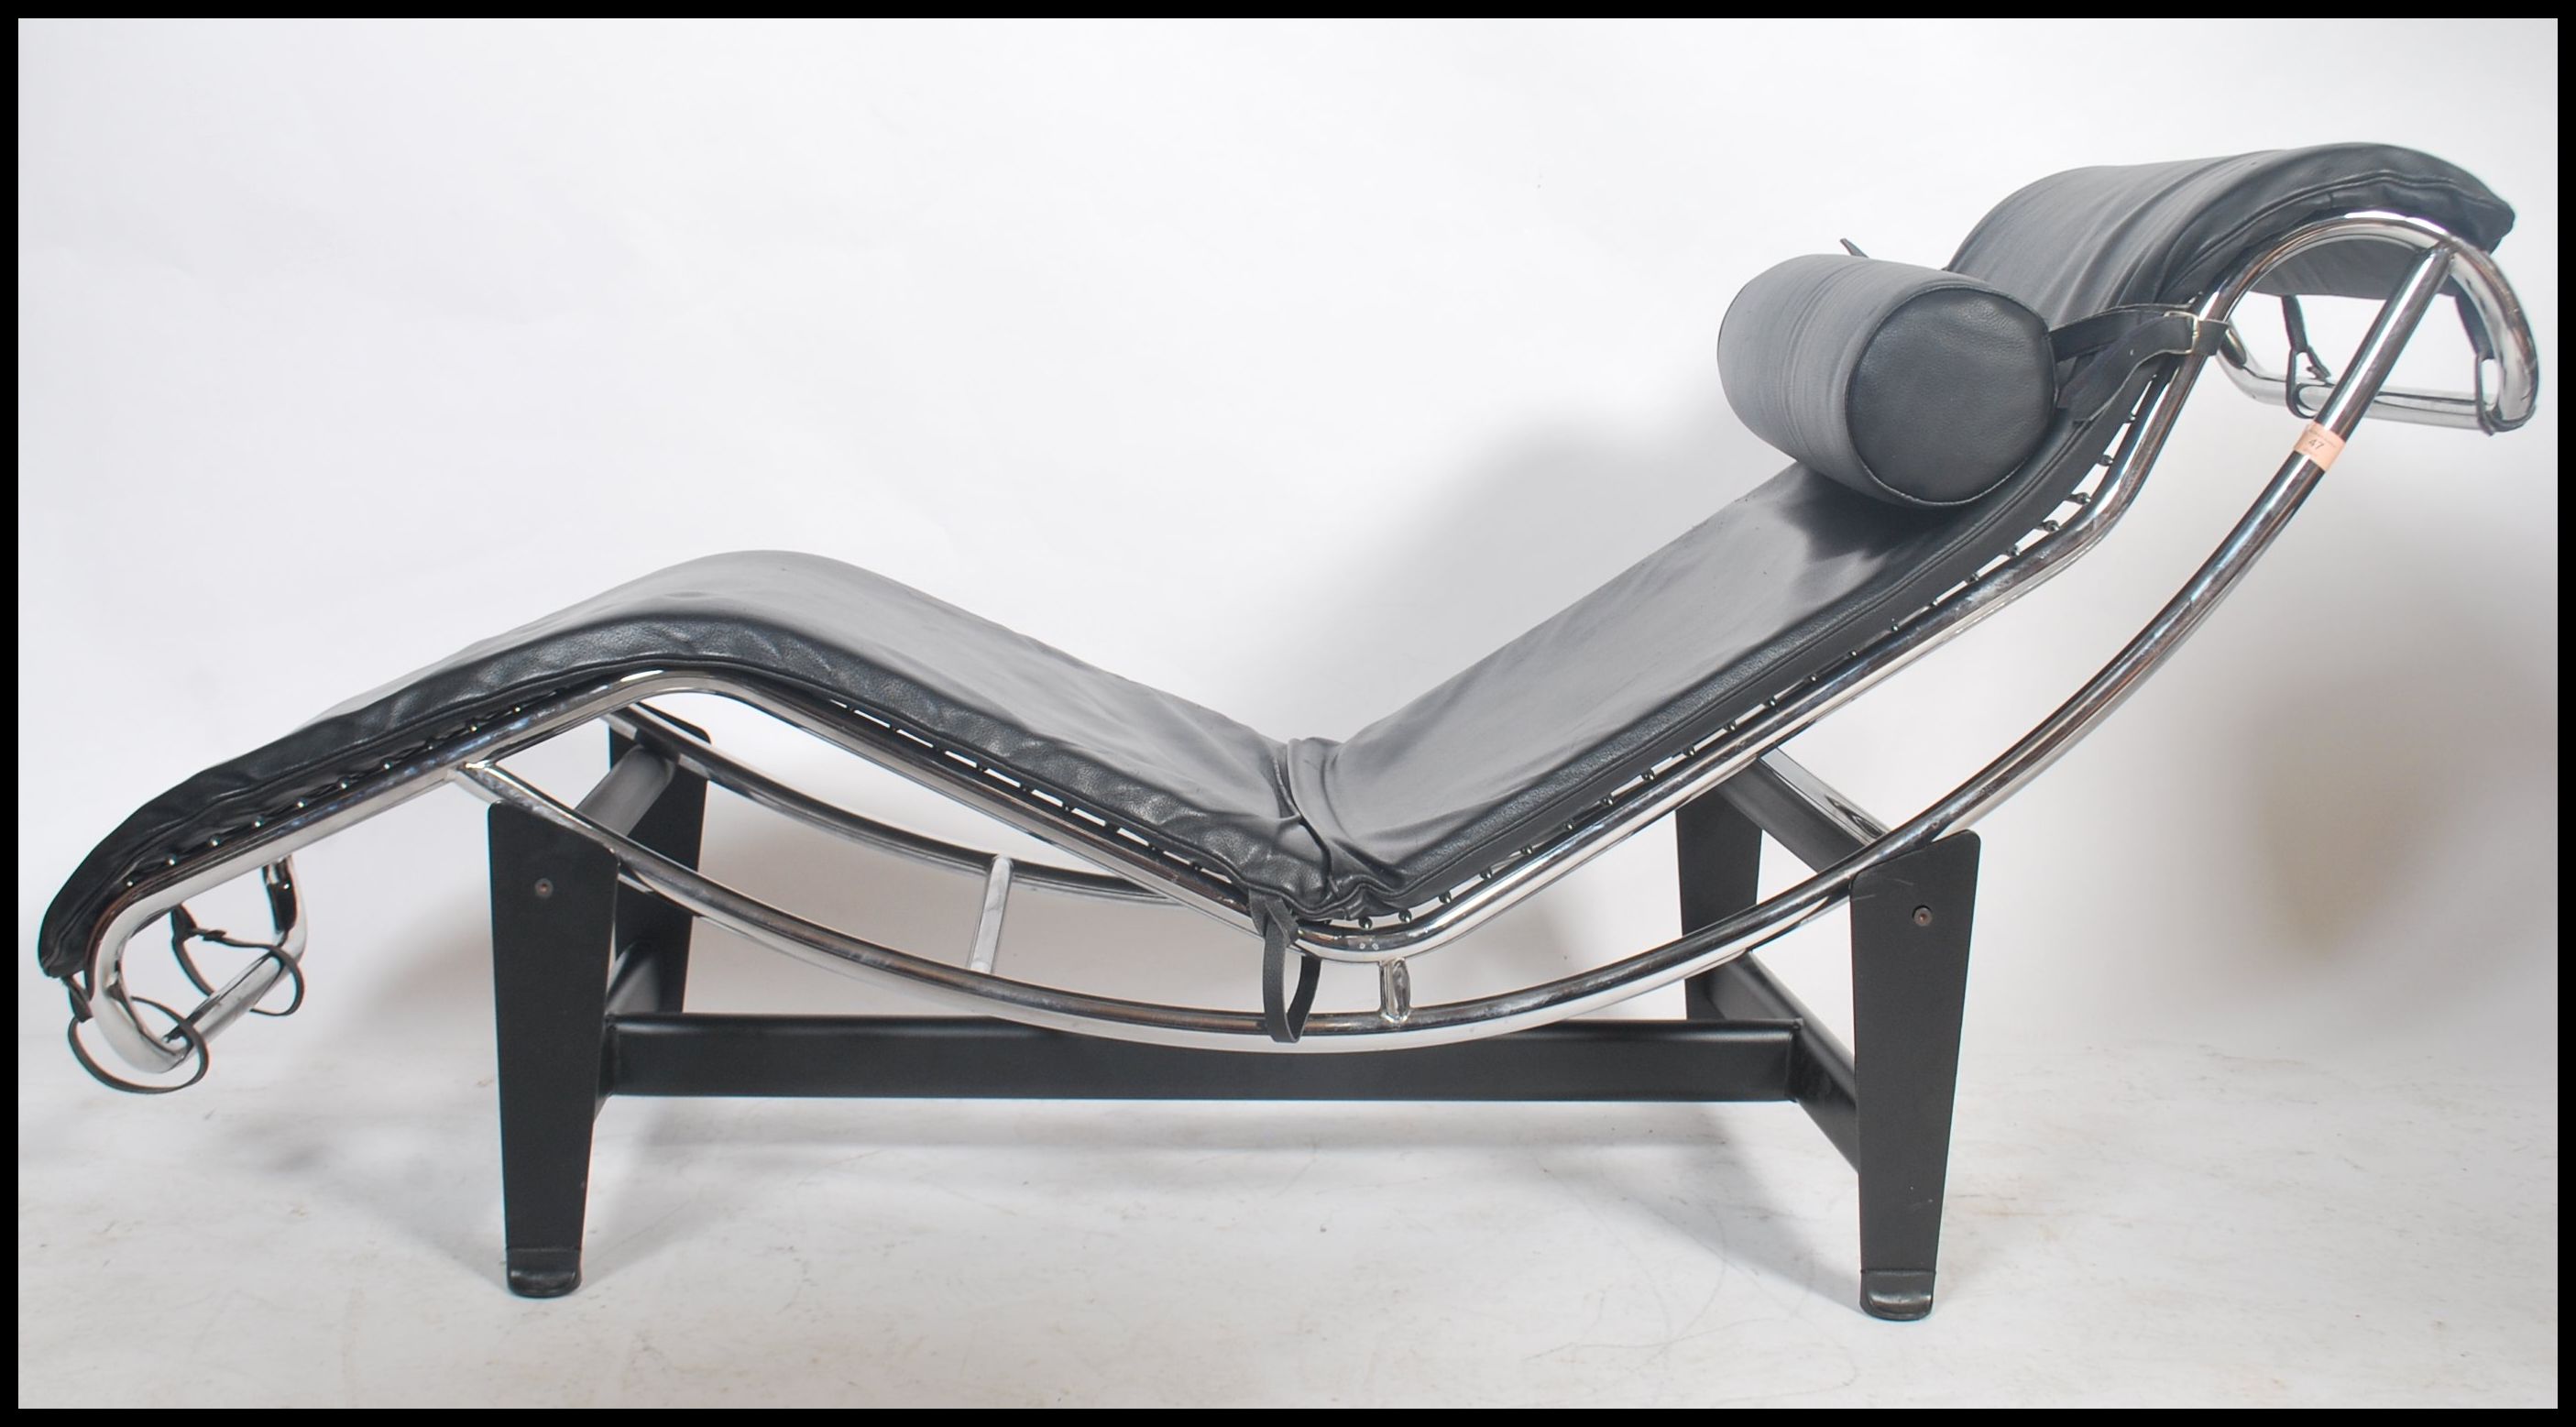 After Le Corbusier LC4 chaise lounge day bed with black leather upholstery and barrel cushion set - Image 3 of 5